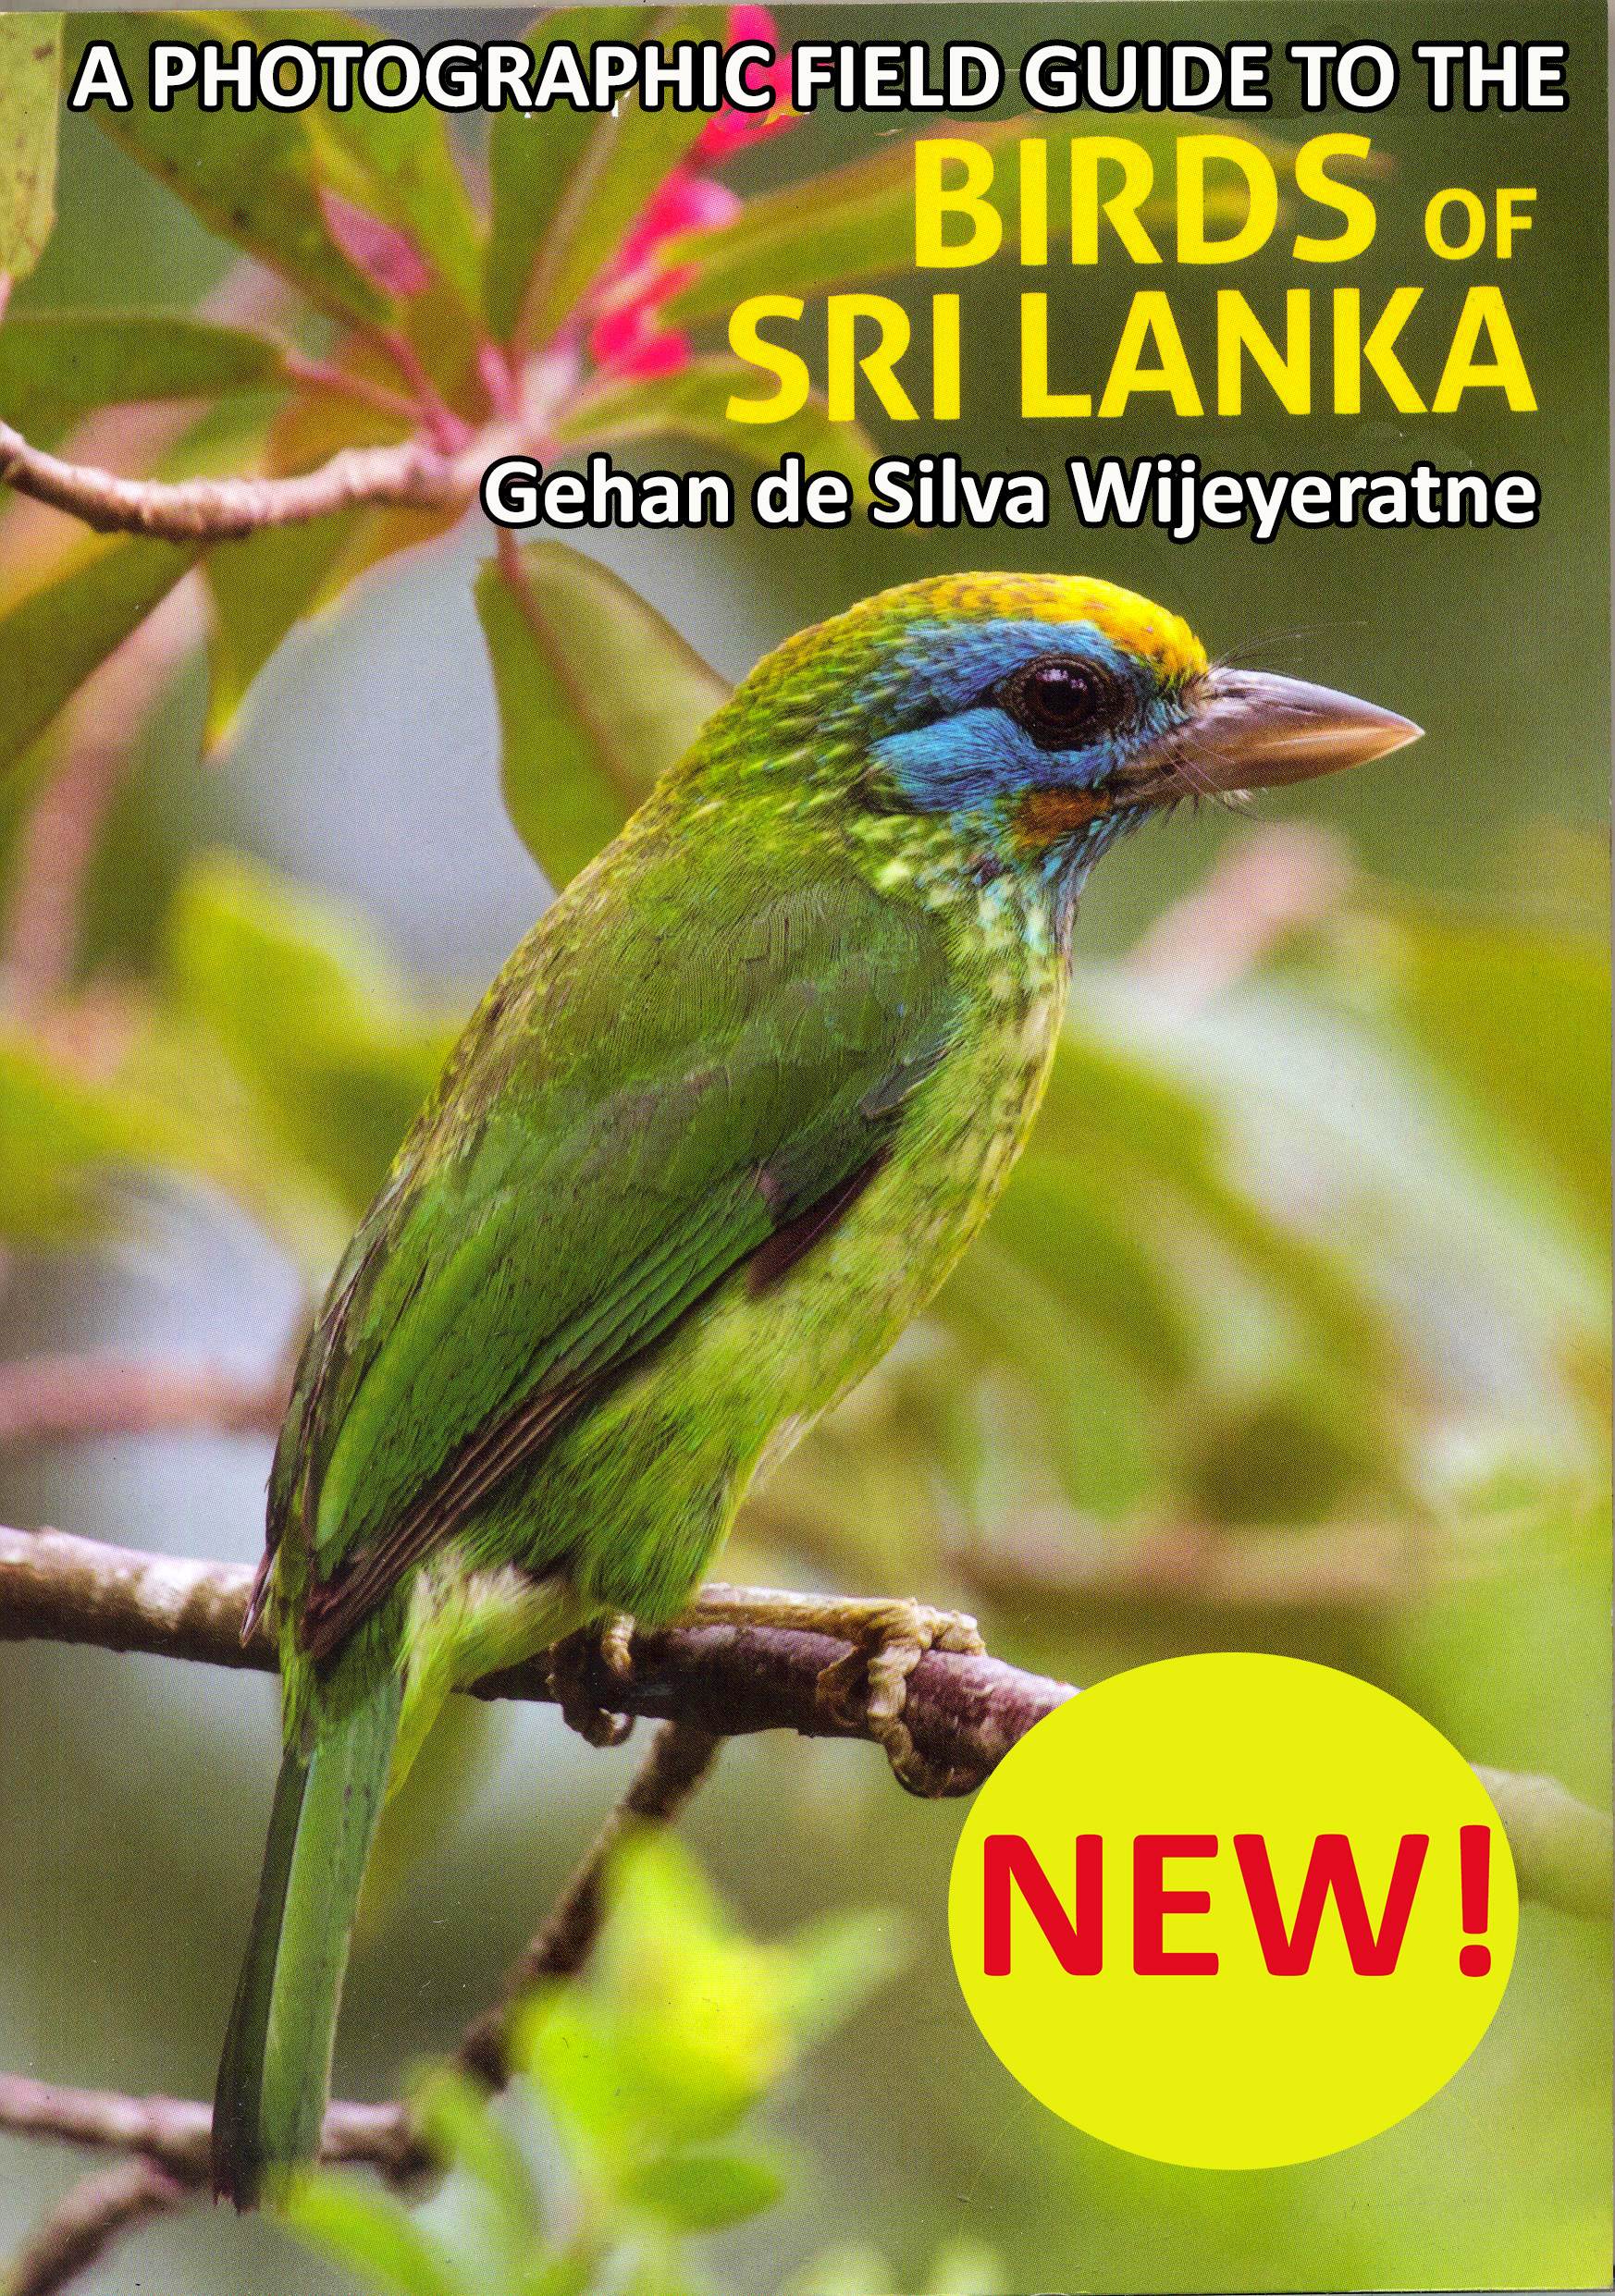 Photographic Field Guide To The Birds Of Sri Lanka